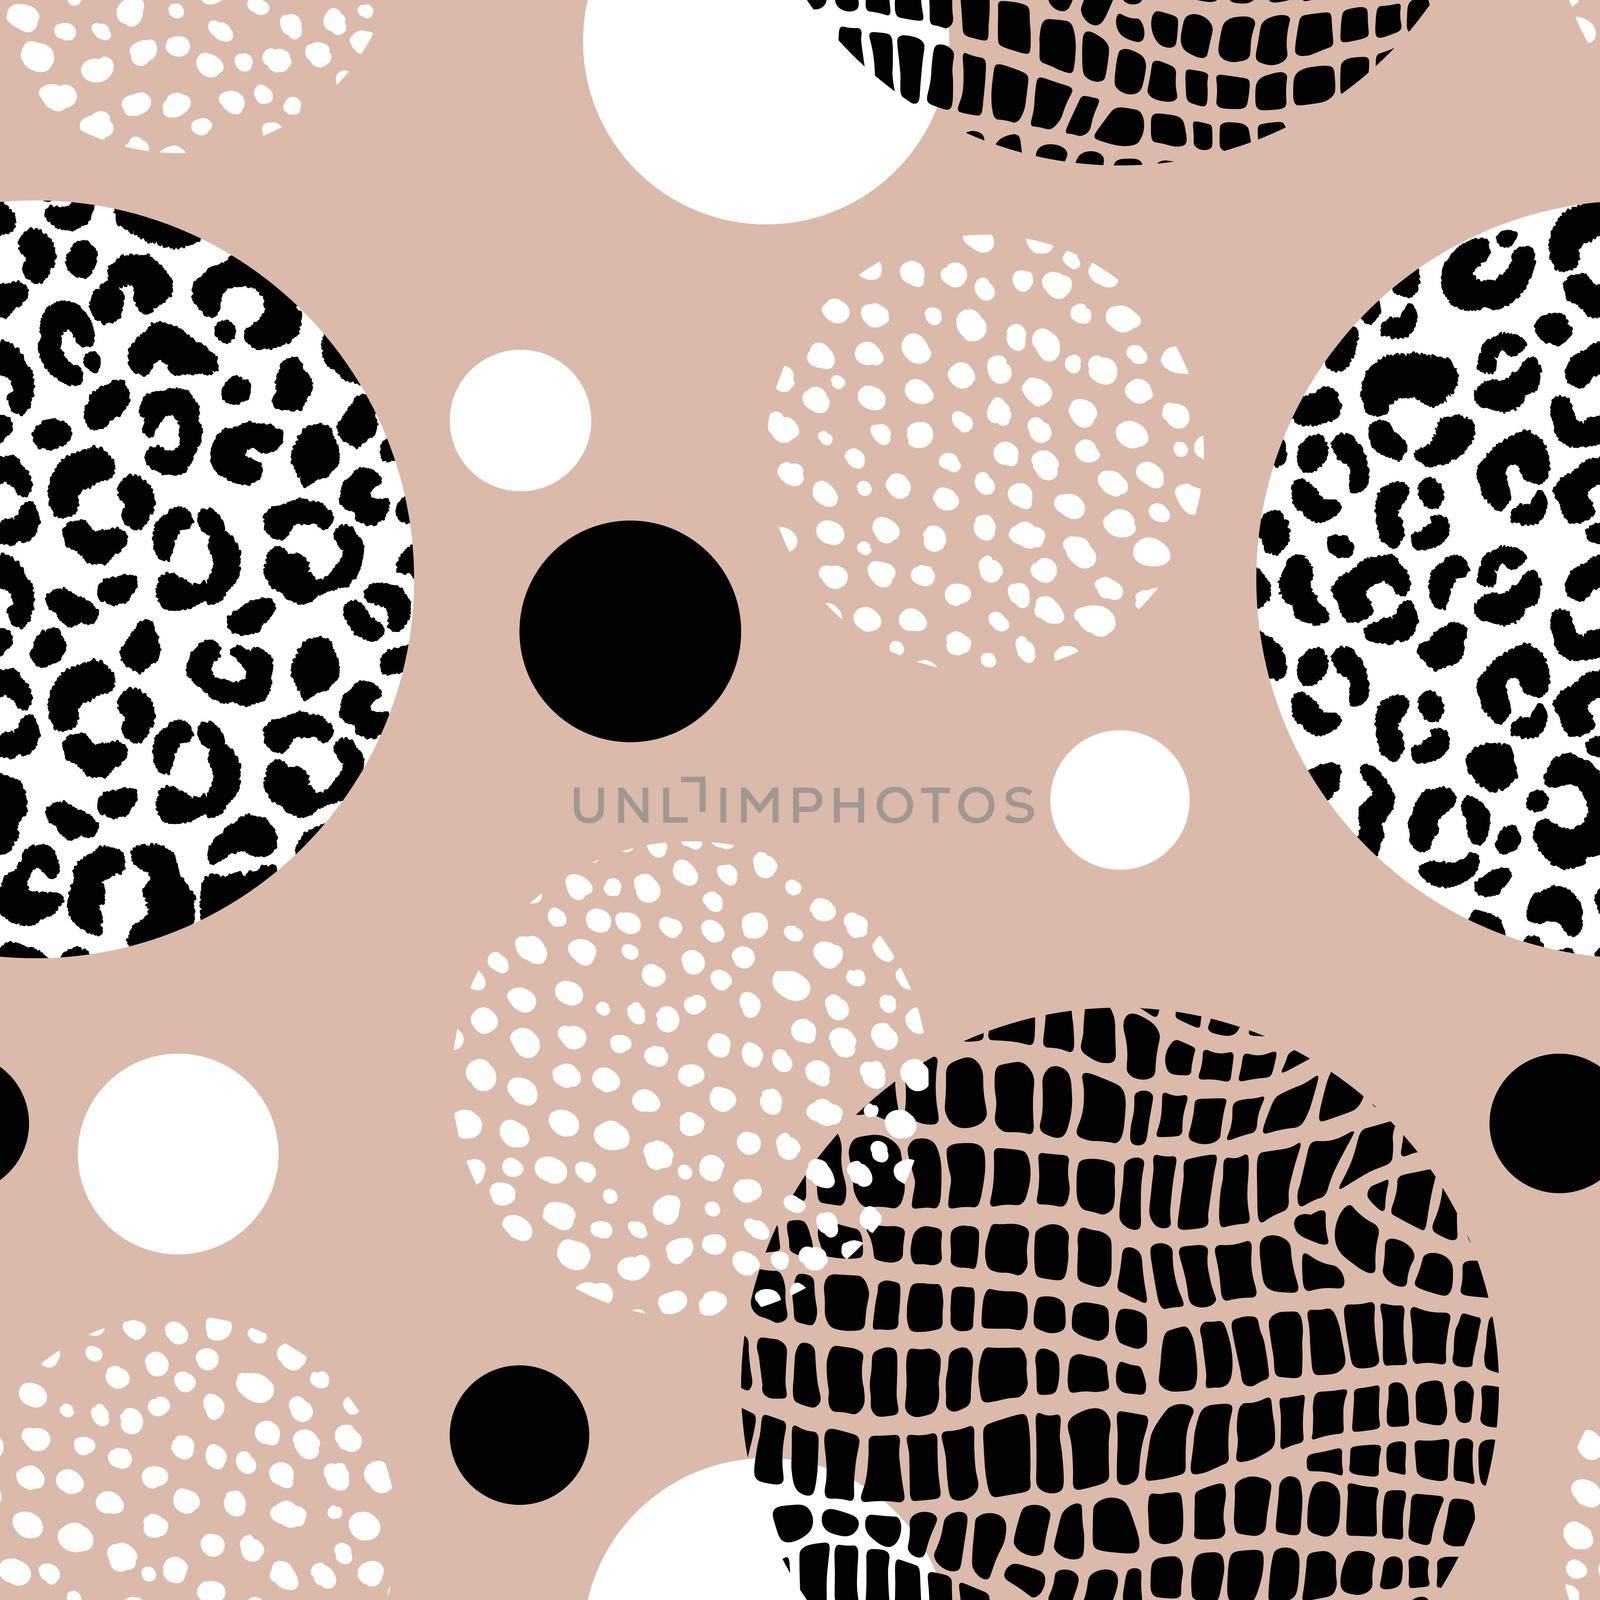 Abstract modern leopard seamless pattern with circles. Animals trendy background. Black and beige decorative vector illustration for print, card, fabric, textile. Modern ornament of stylized skin.